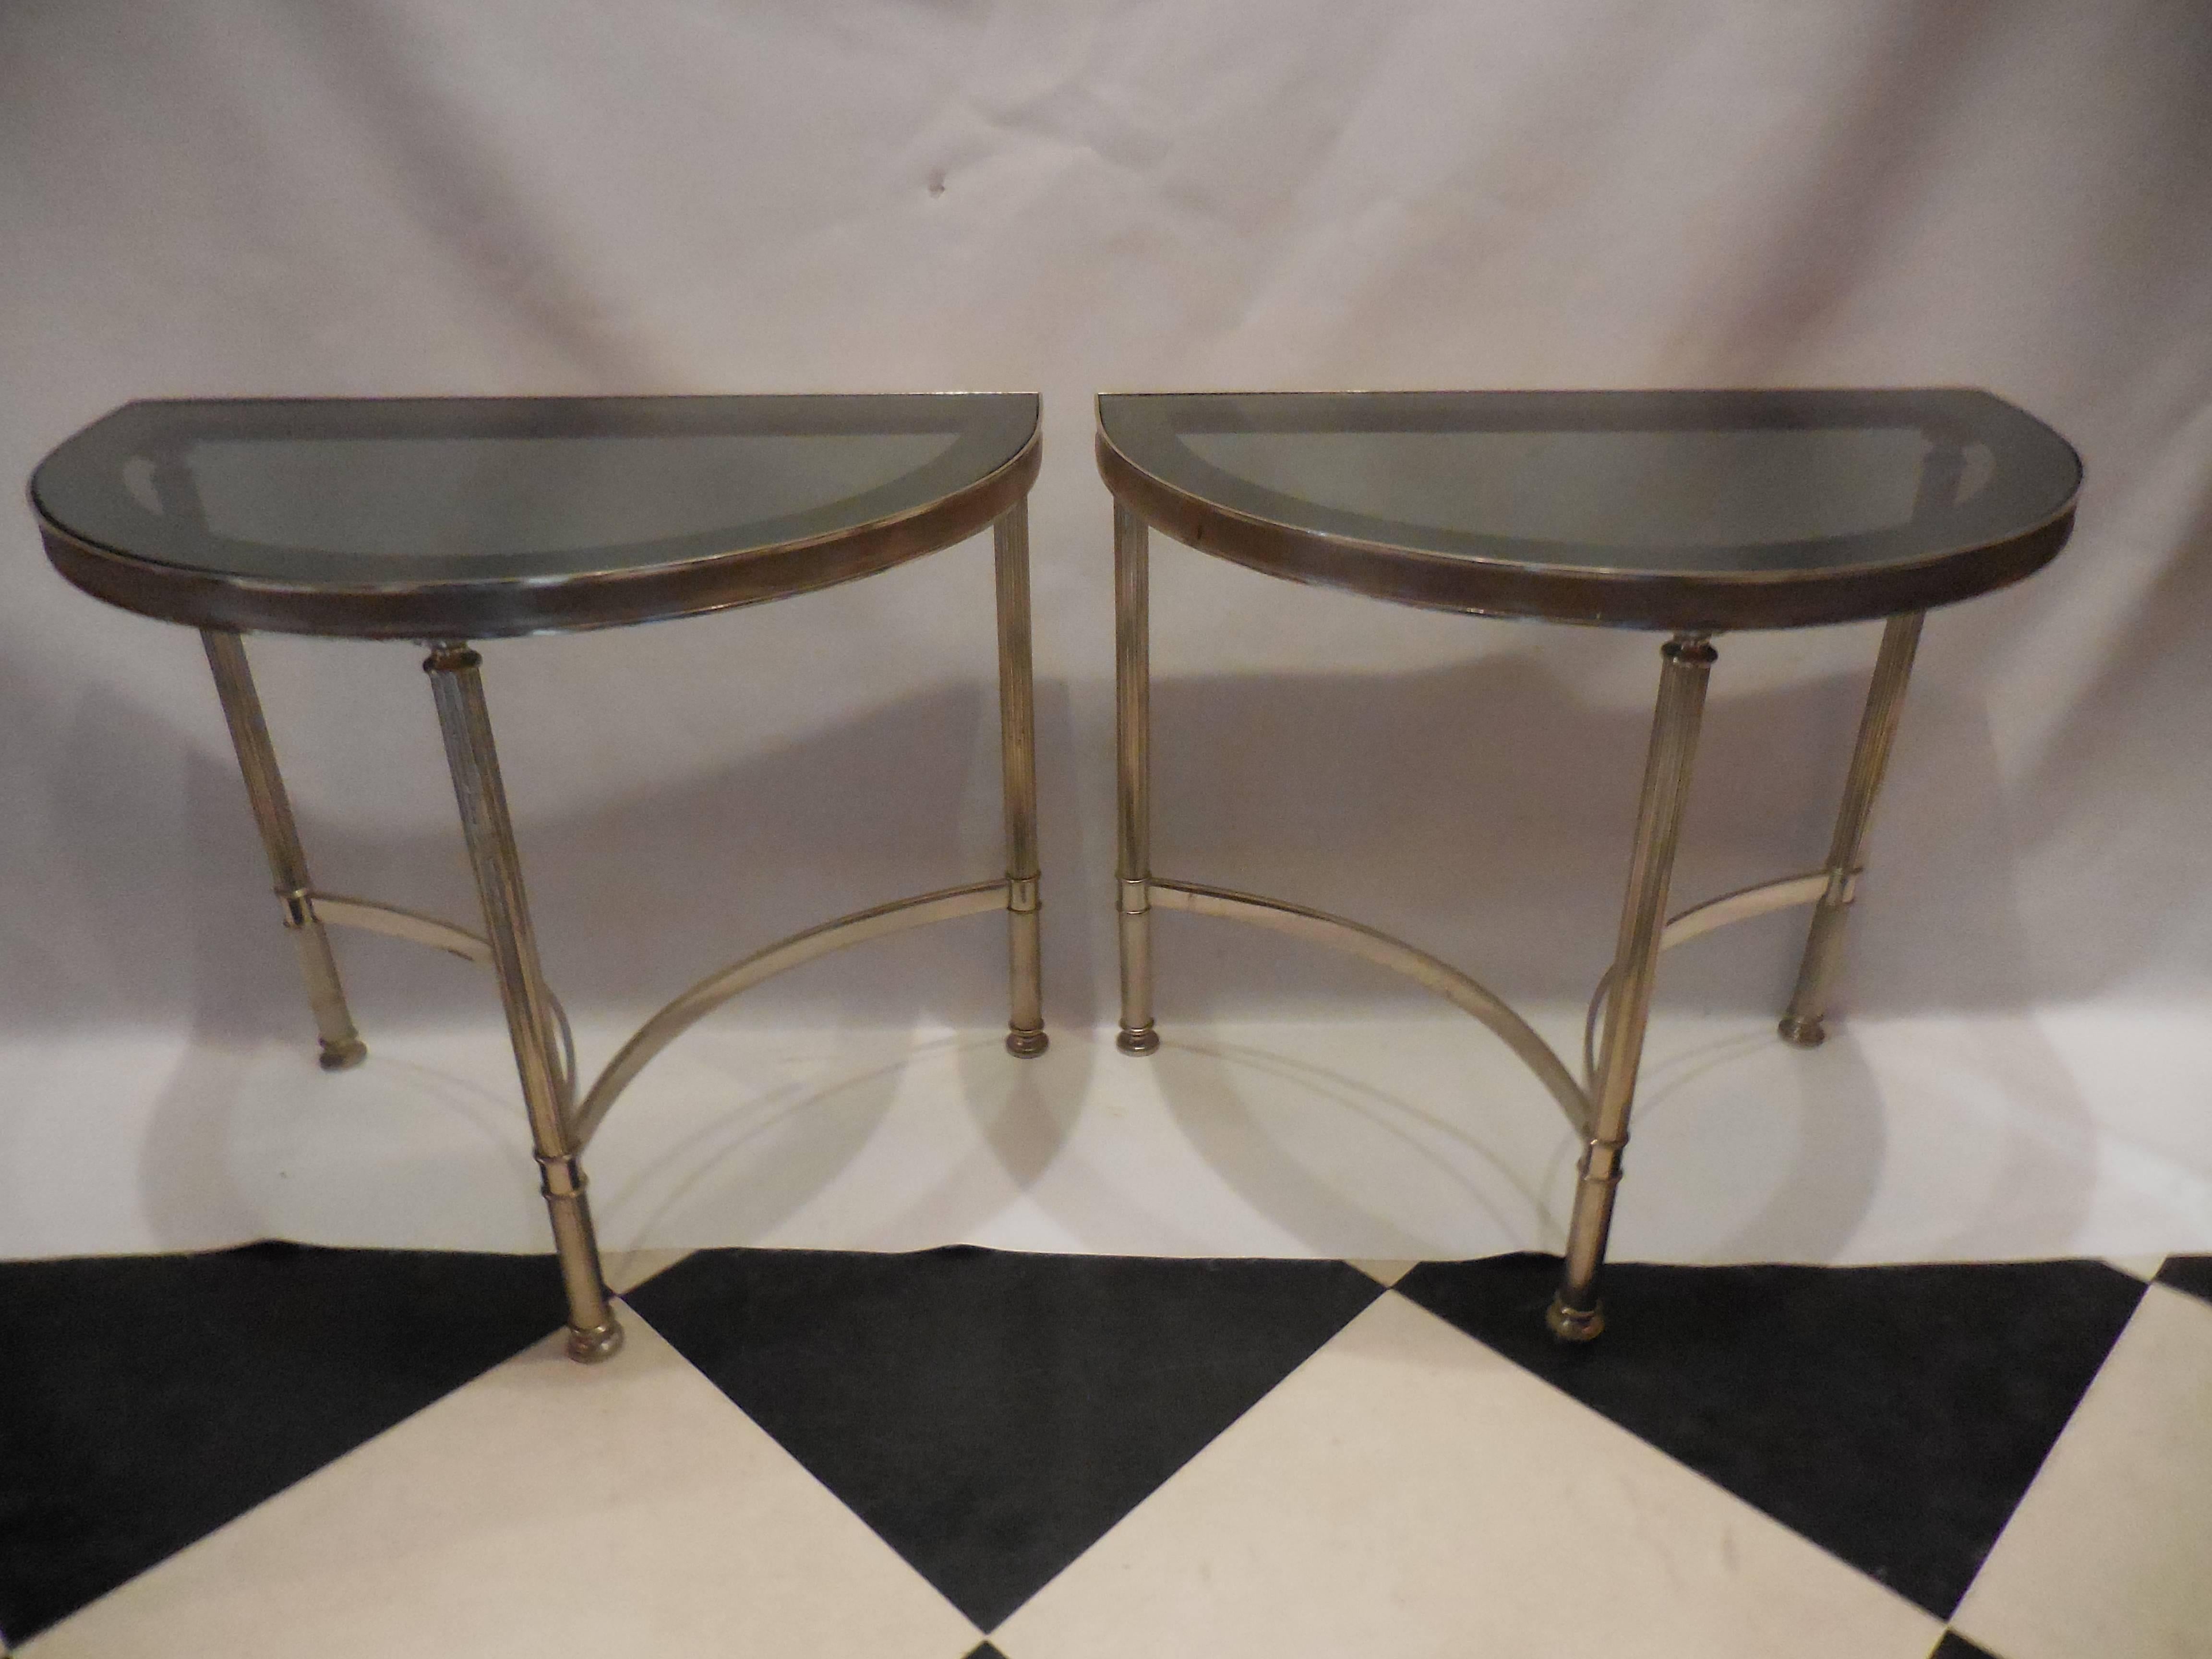 Pair of Mid-Century Modern demilune side tables with fluted polished steel legs and smoked grey glass. In good condition.